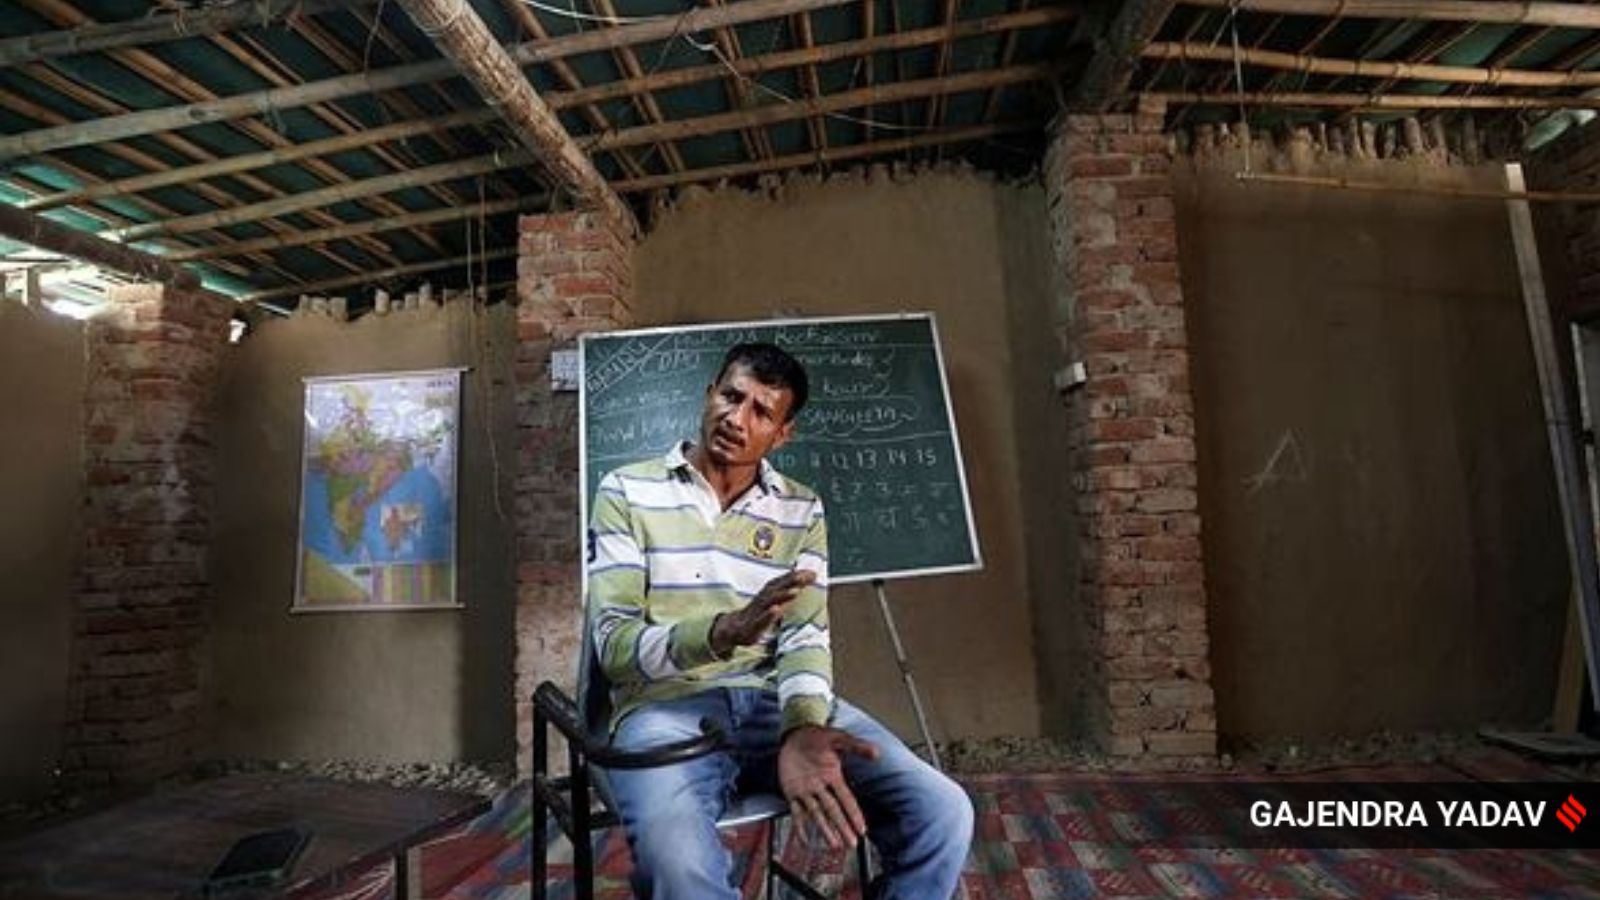 Moolchand earns around Rs 10,000 per month by tutoring children in the camp.